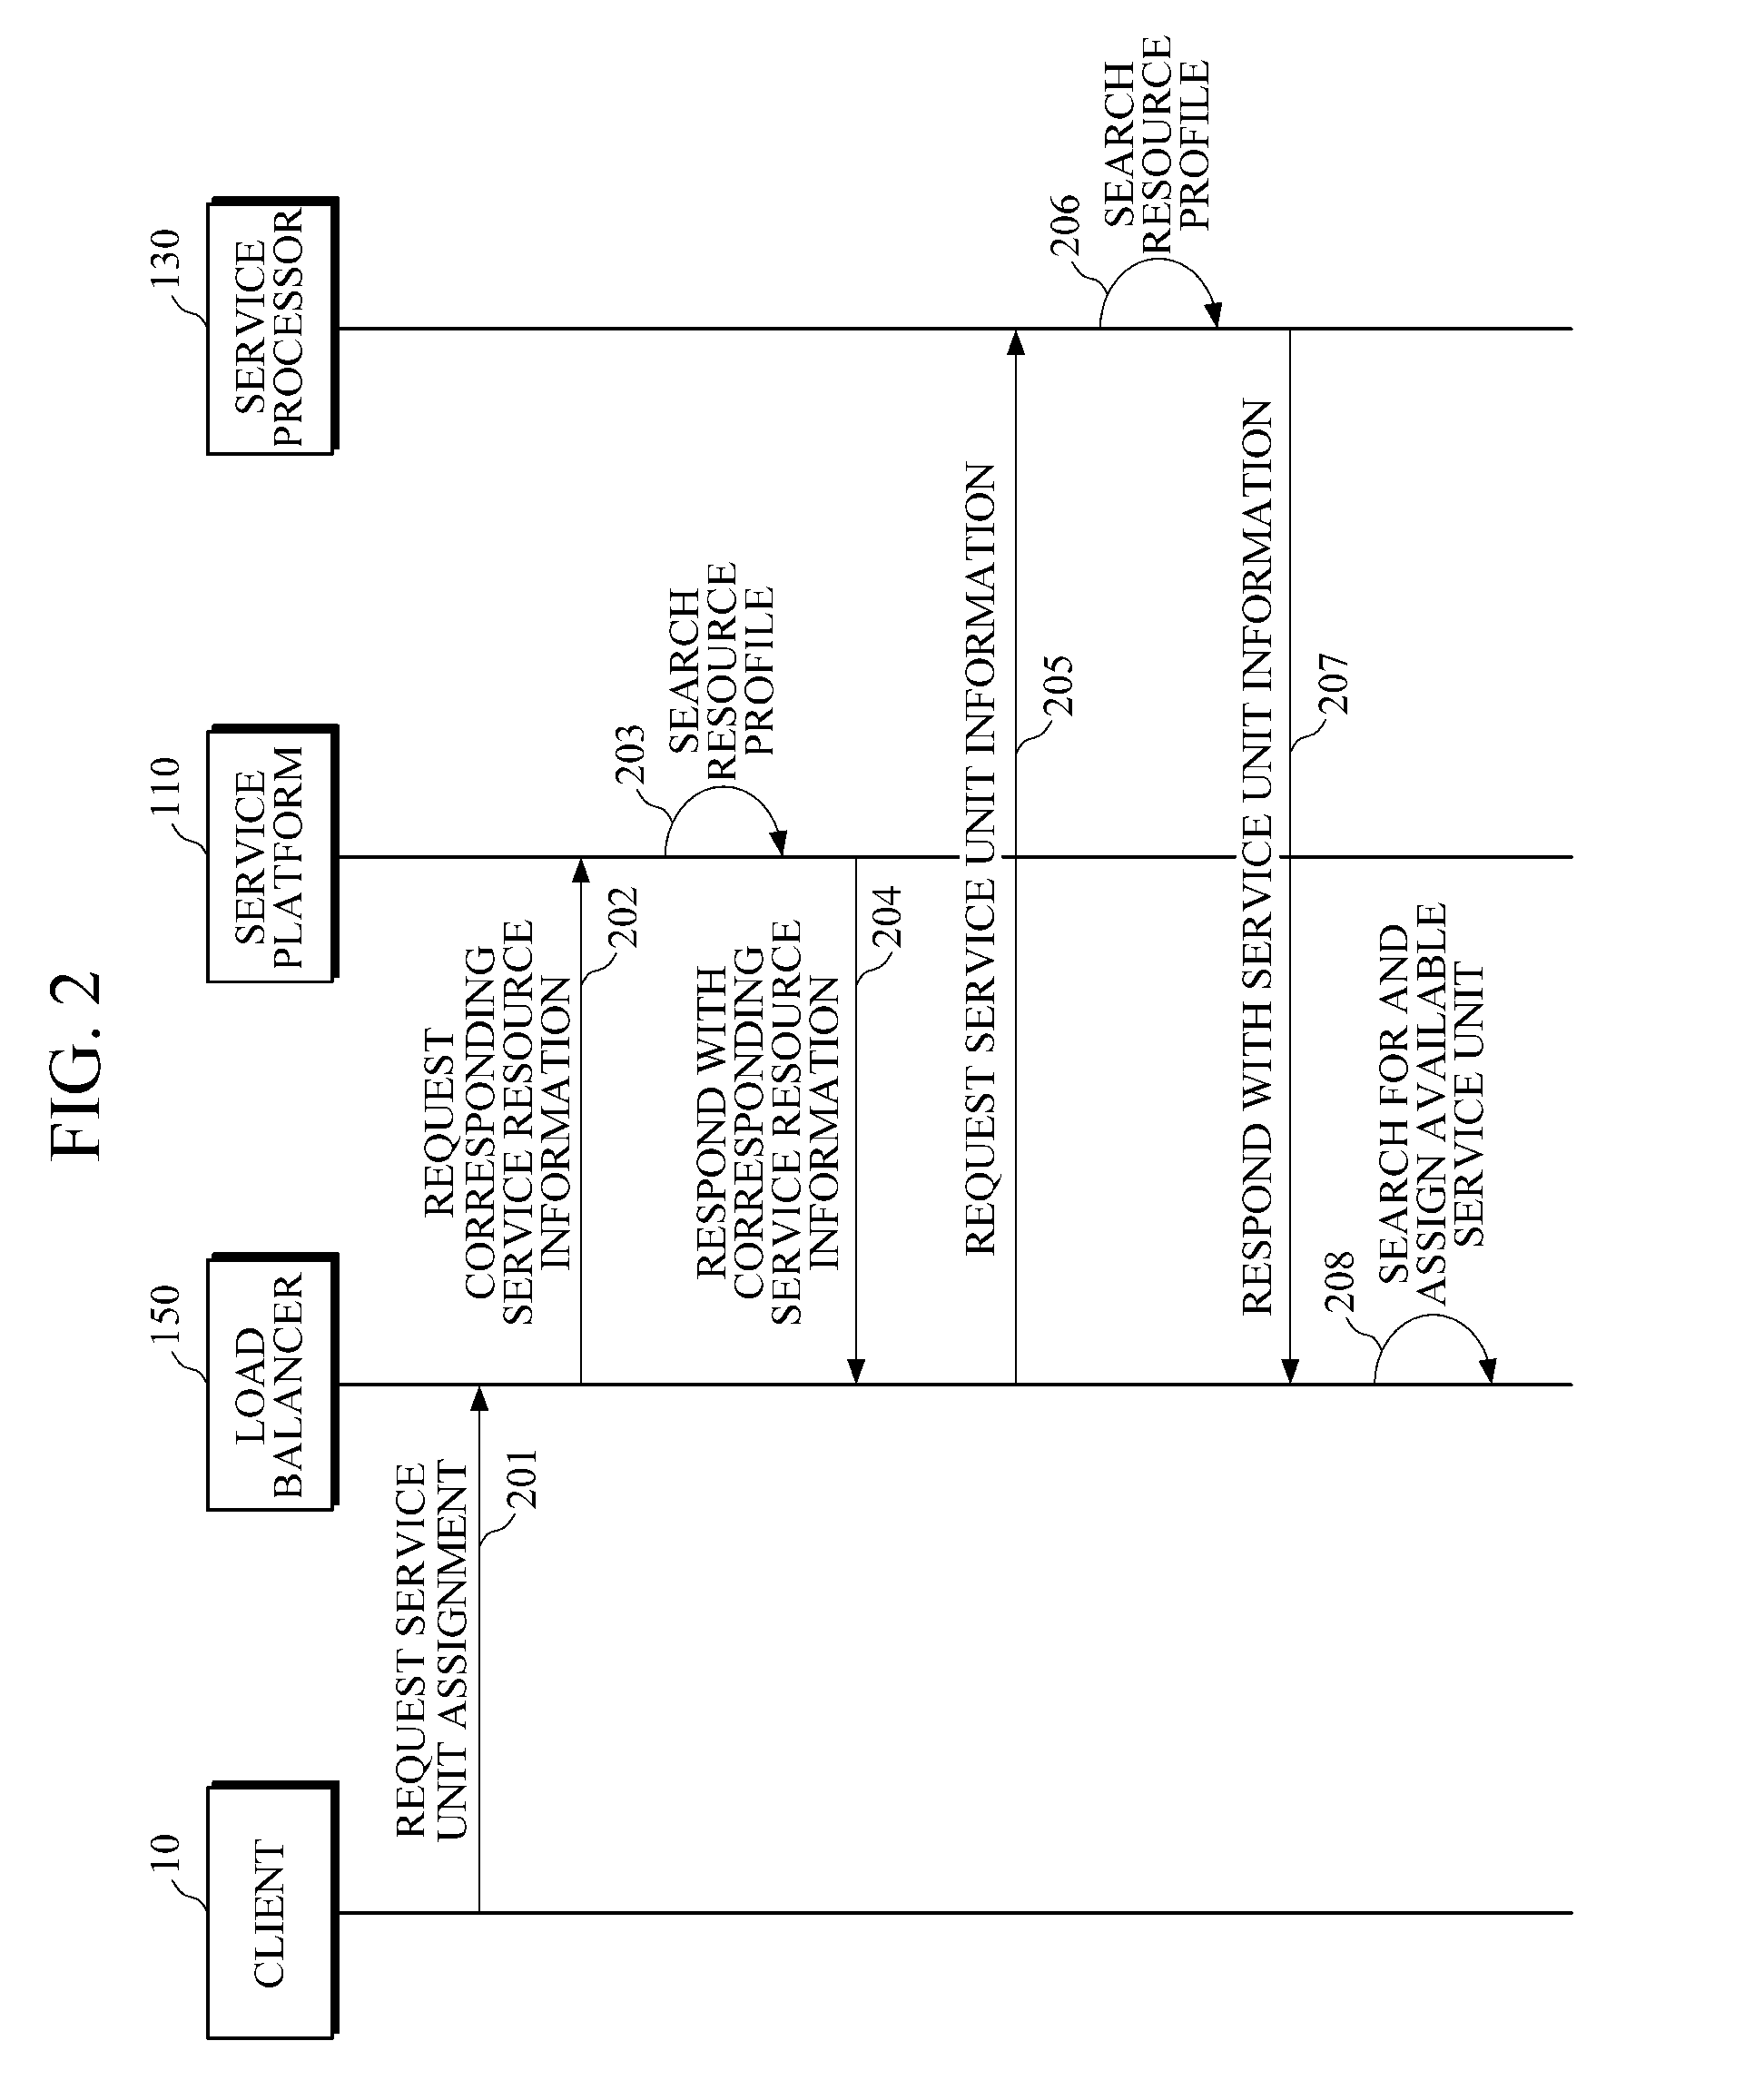 Load balancing apparatus and method based on estimation of resource usage